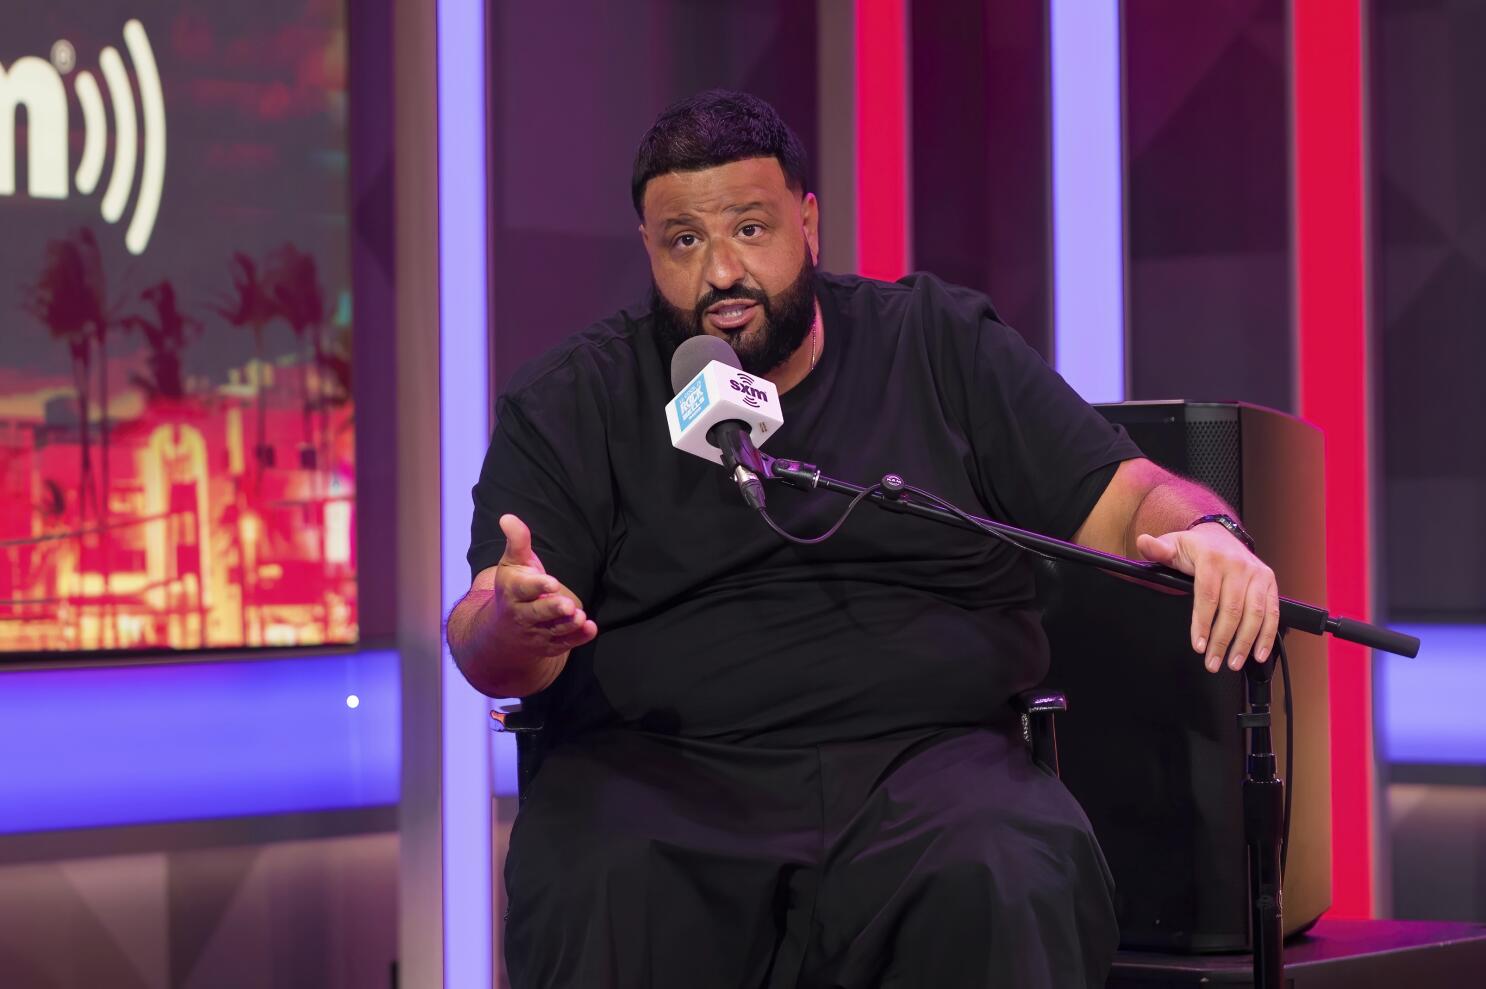 DJ Khaled wipes out in surfing accident, shares 'recovery' efforts with  massages and golfing